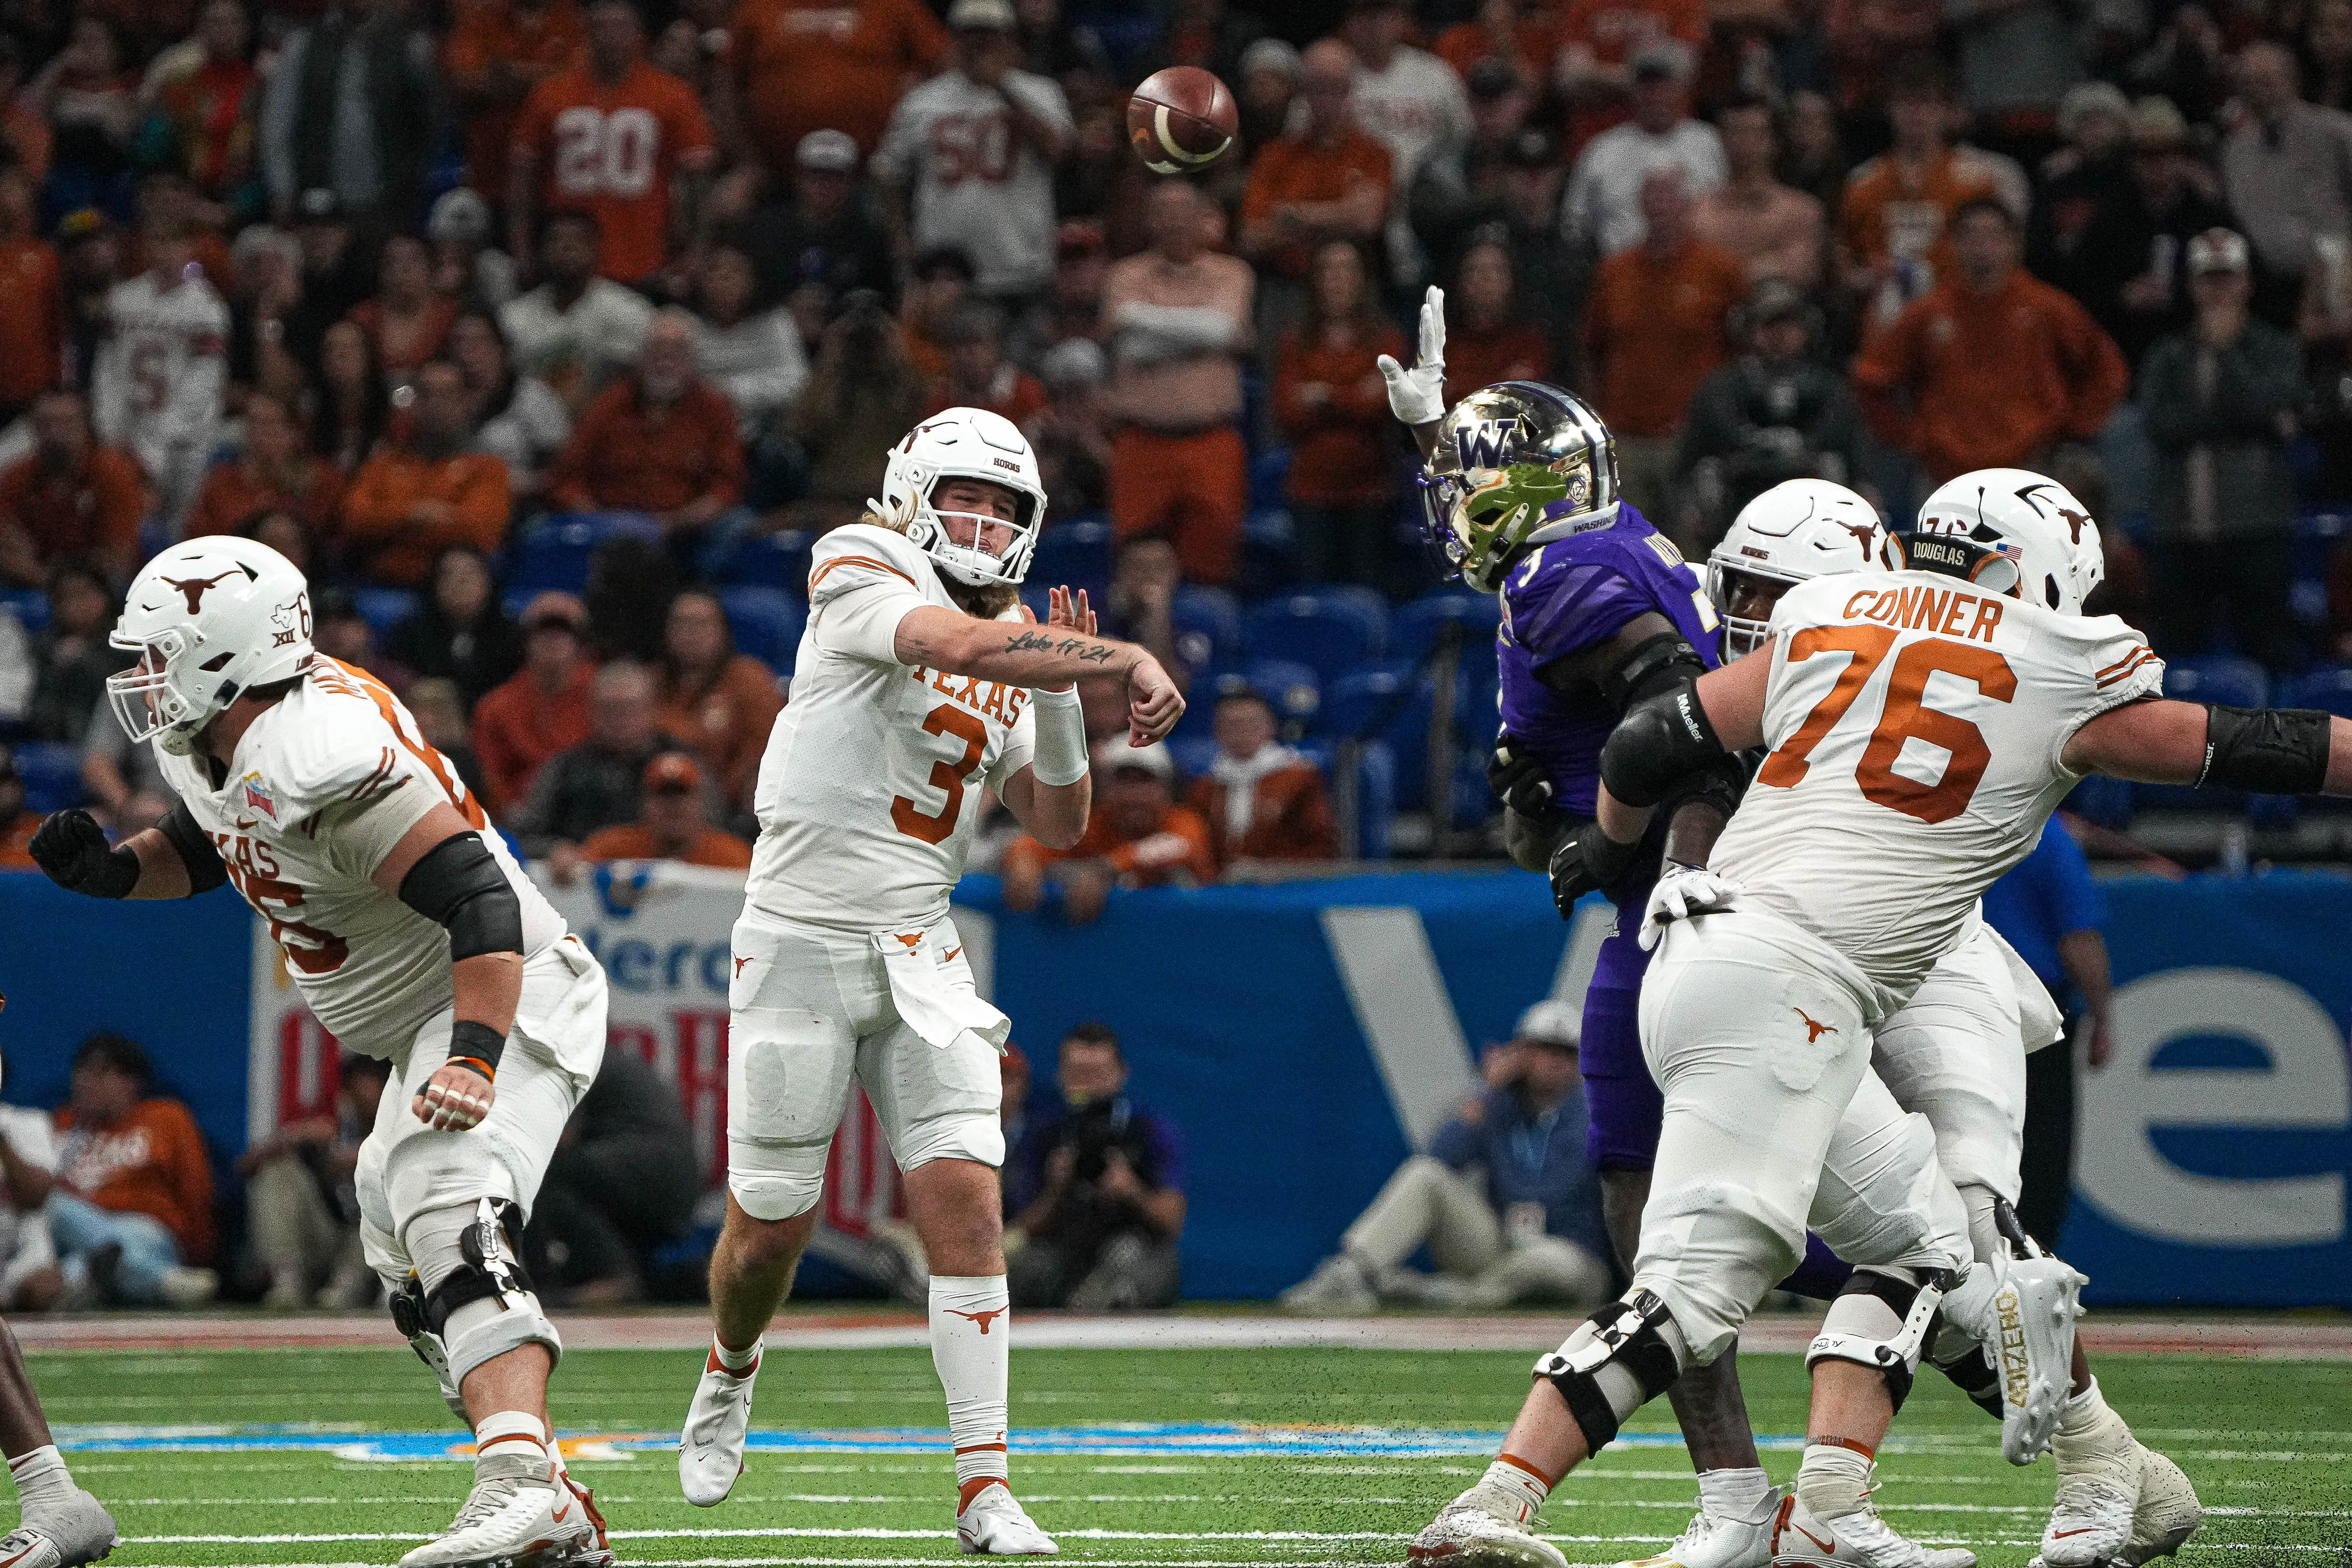 Initial thoughts about No. 3 Texas and the College Football Playoff